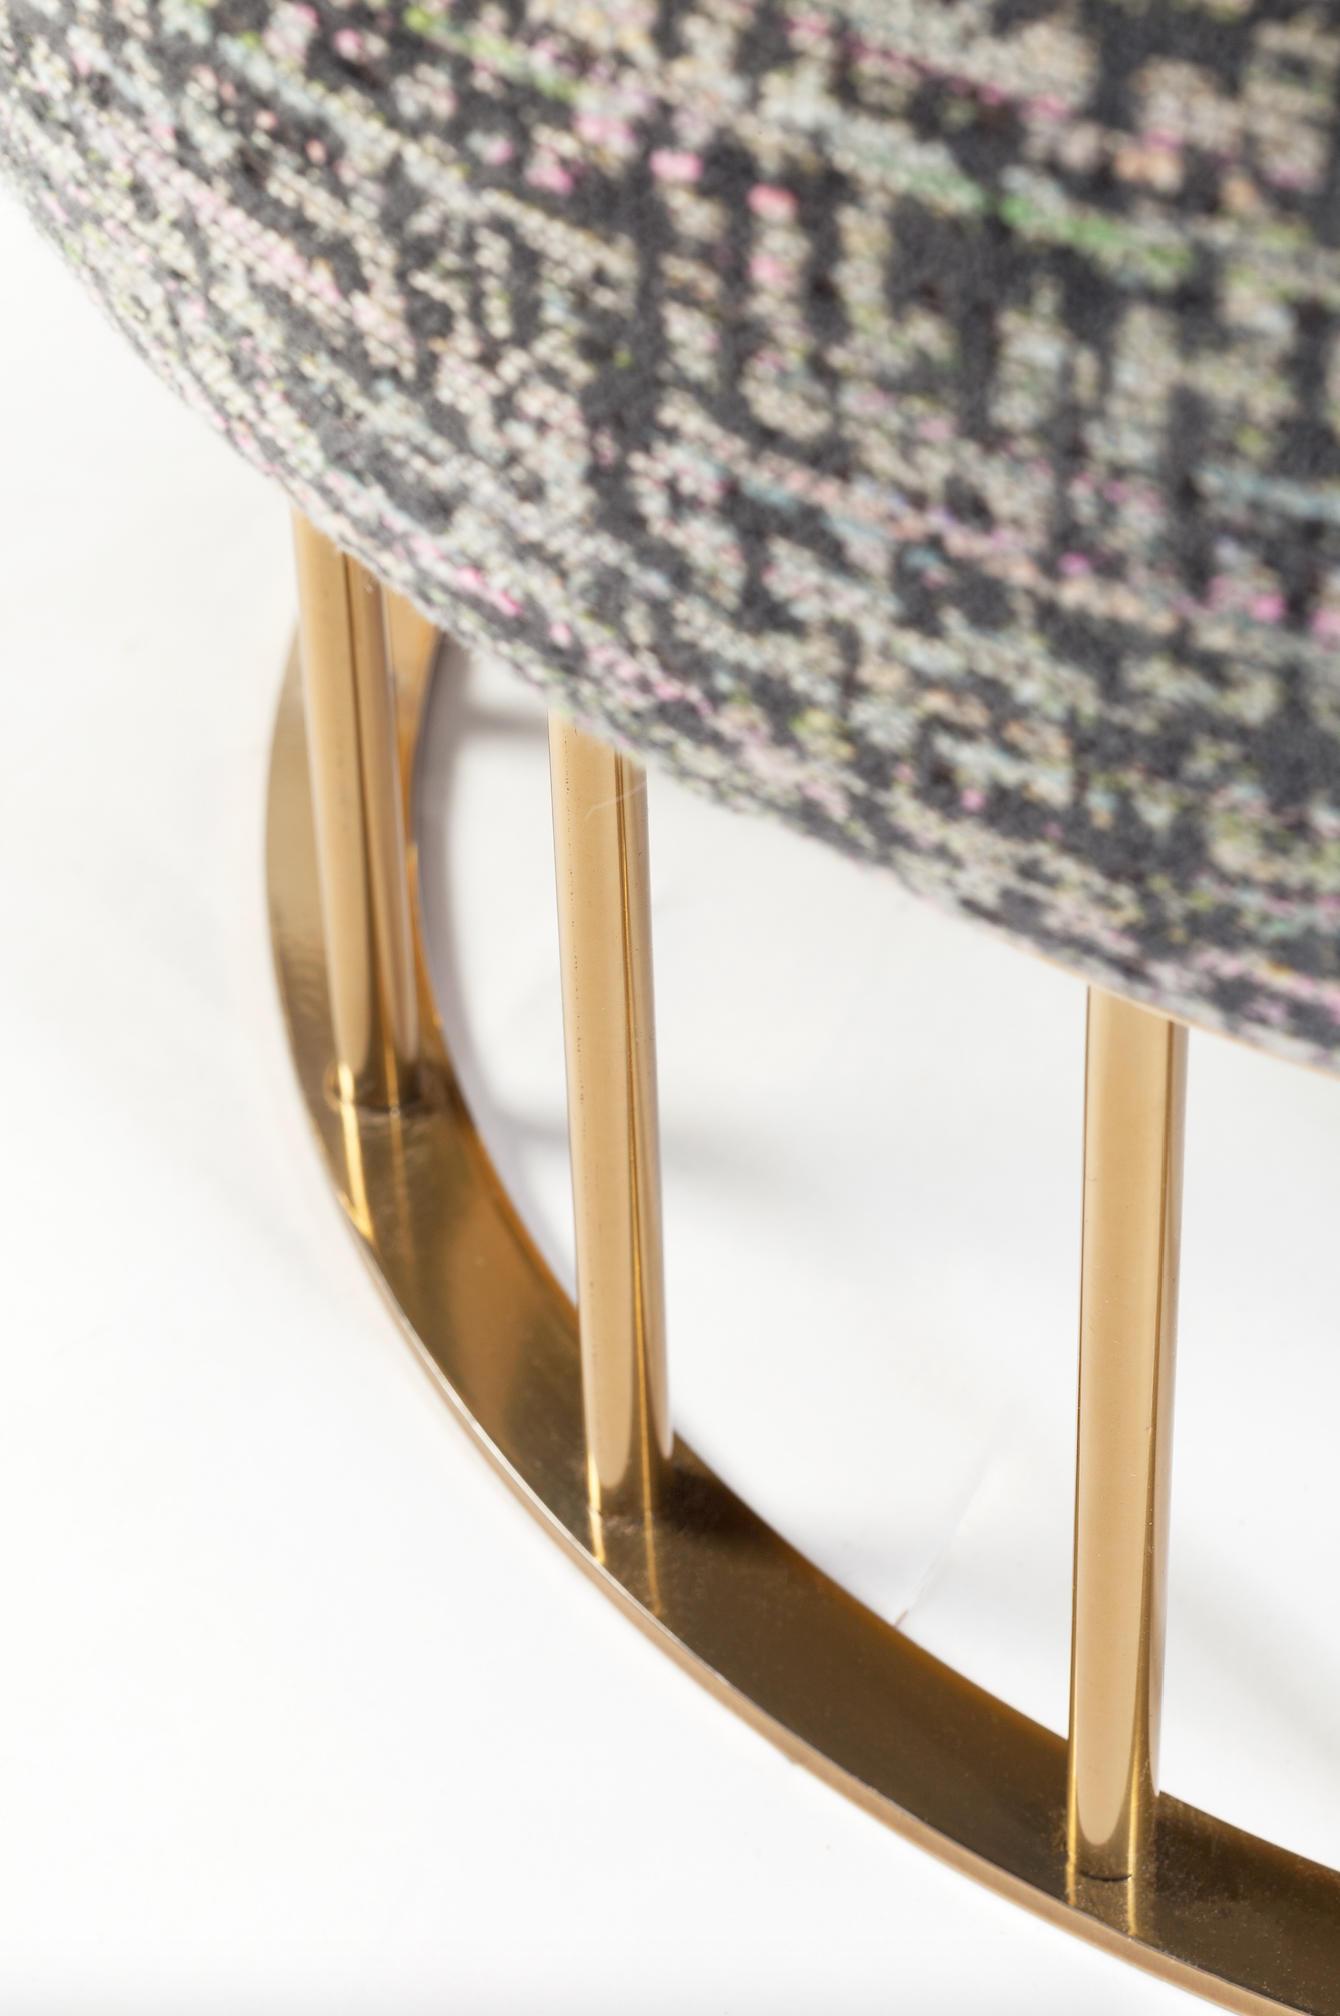 Playing with dichotomies between rough materials and soft textures, cold and hot materials, round and straight shapes is what Mary stool is all about. A great accent piece that can be customized with many different ways. Made to Order. 

For sales